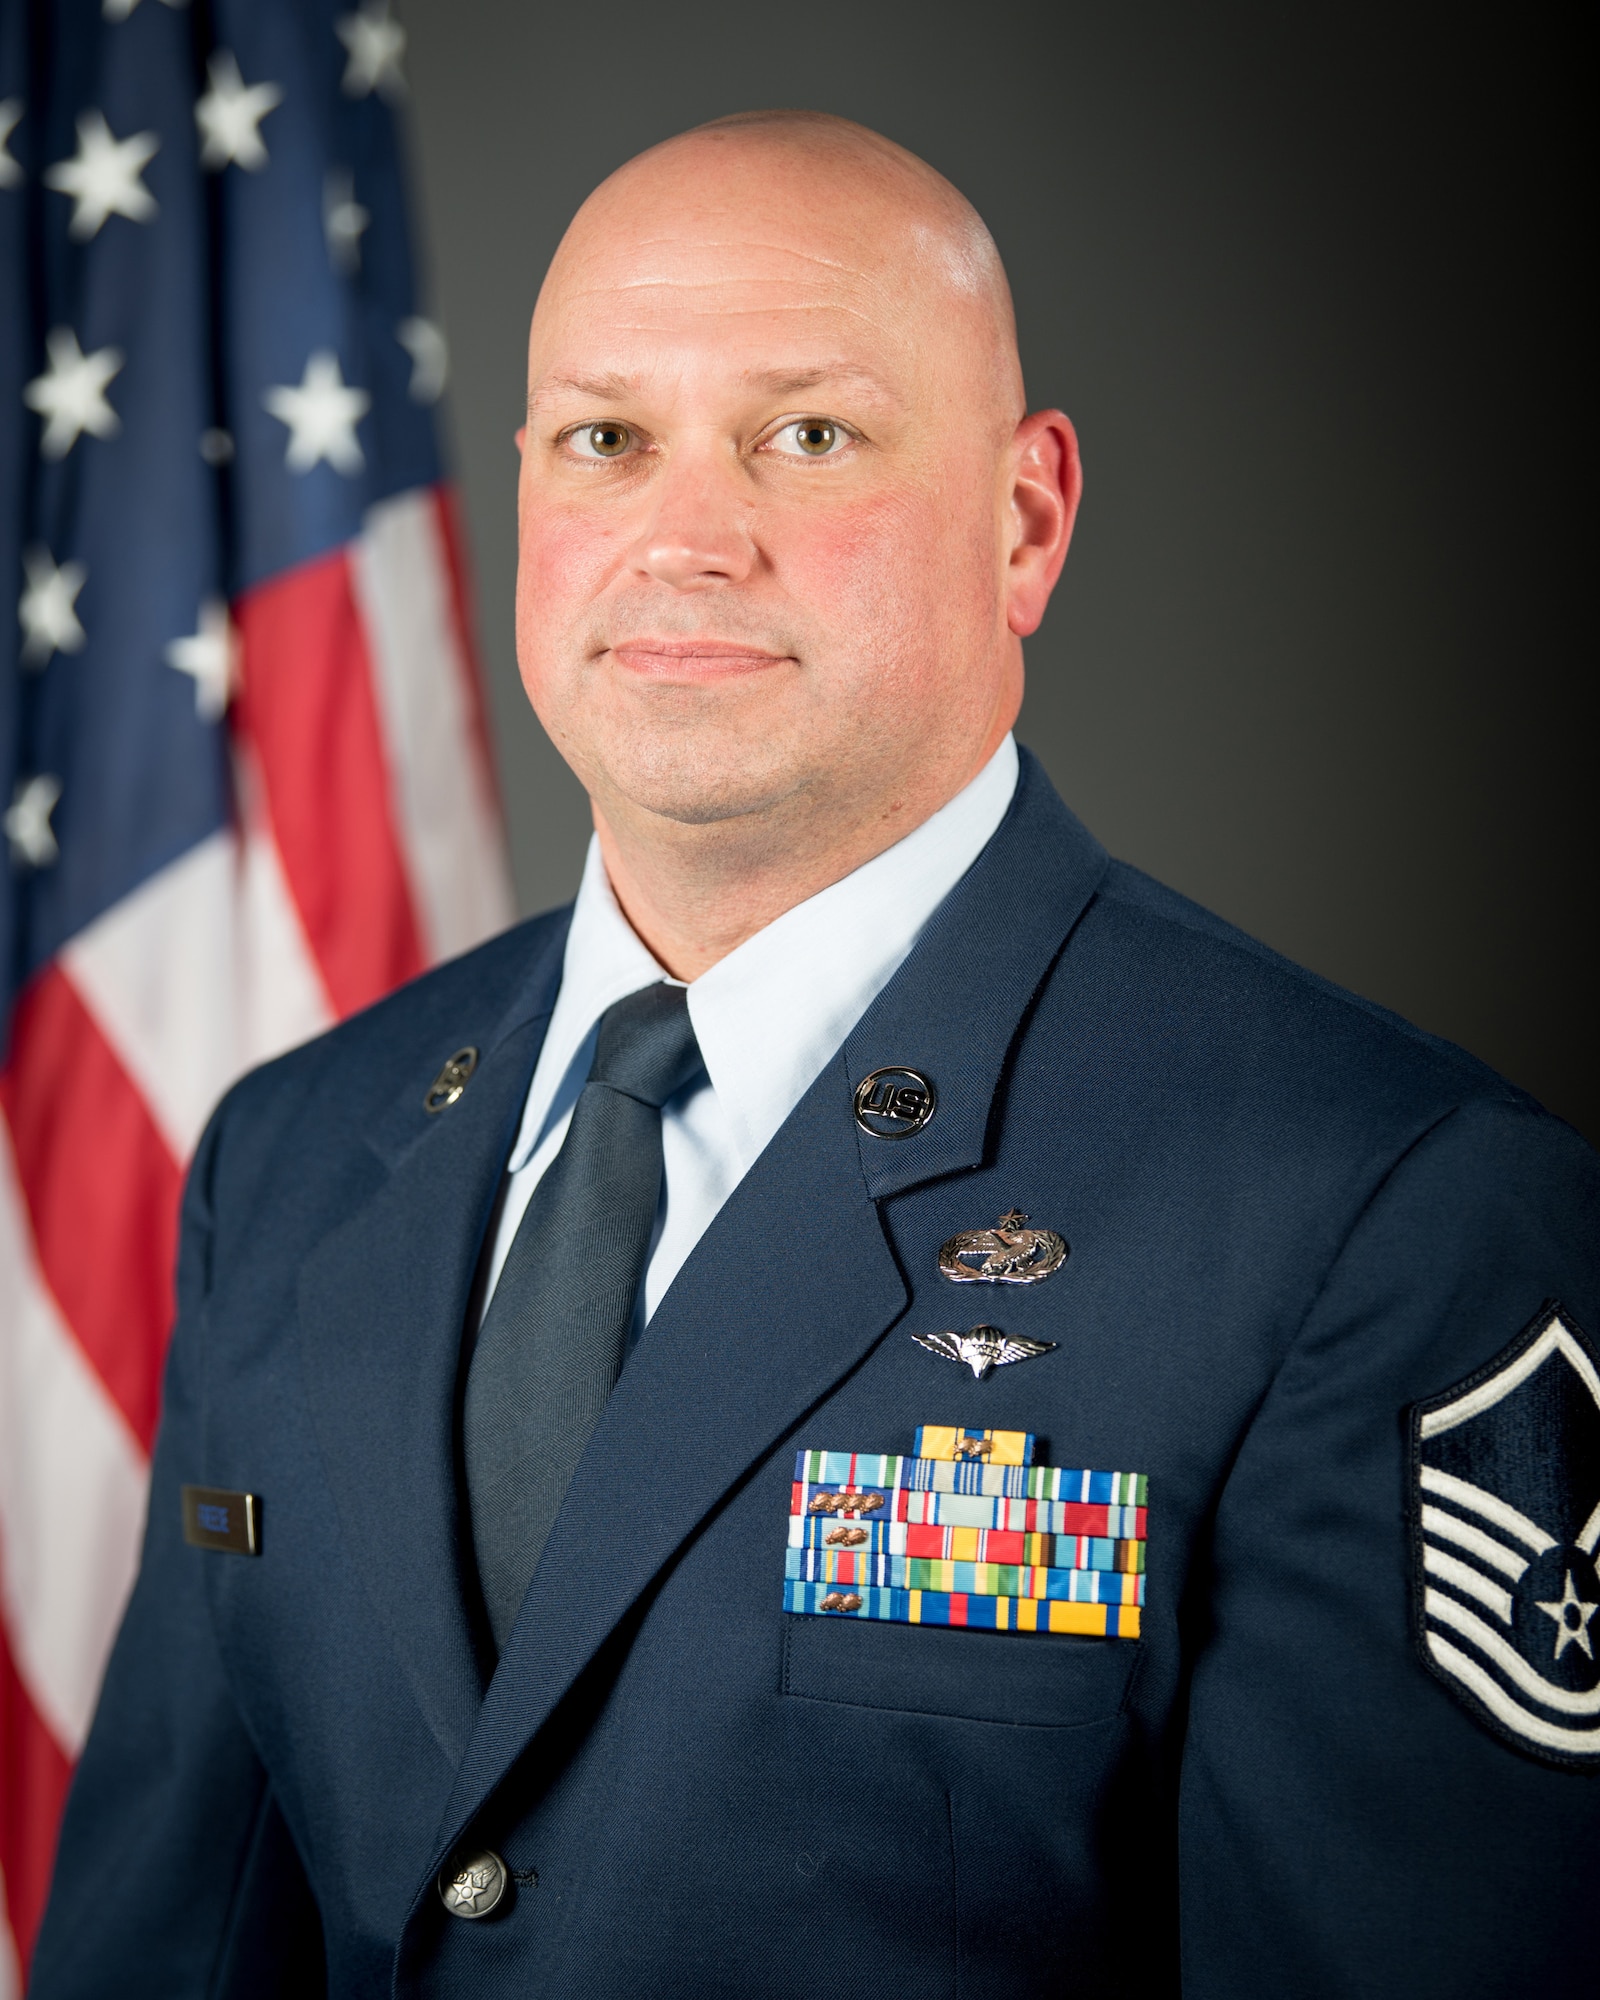 Master Sgt. Kevin Freese has been named the 2020 Kentucky Air National Guard Airman of the Year in the Senior Non-Commissioned Officer category. (U.S. Air National Guard photo by Staff Sgt. Joshua Horton)